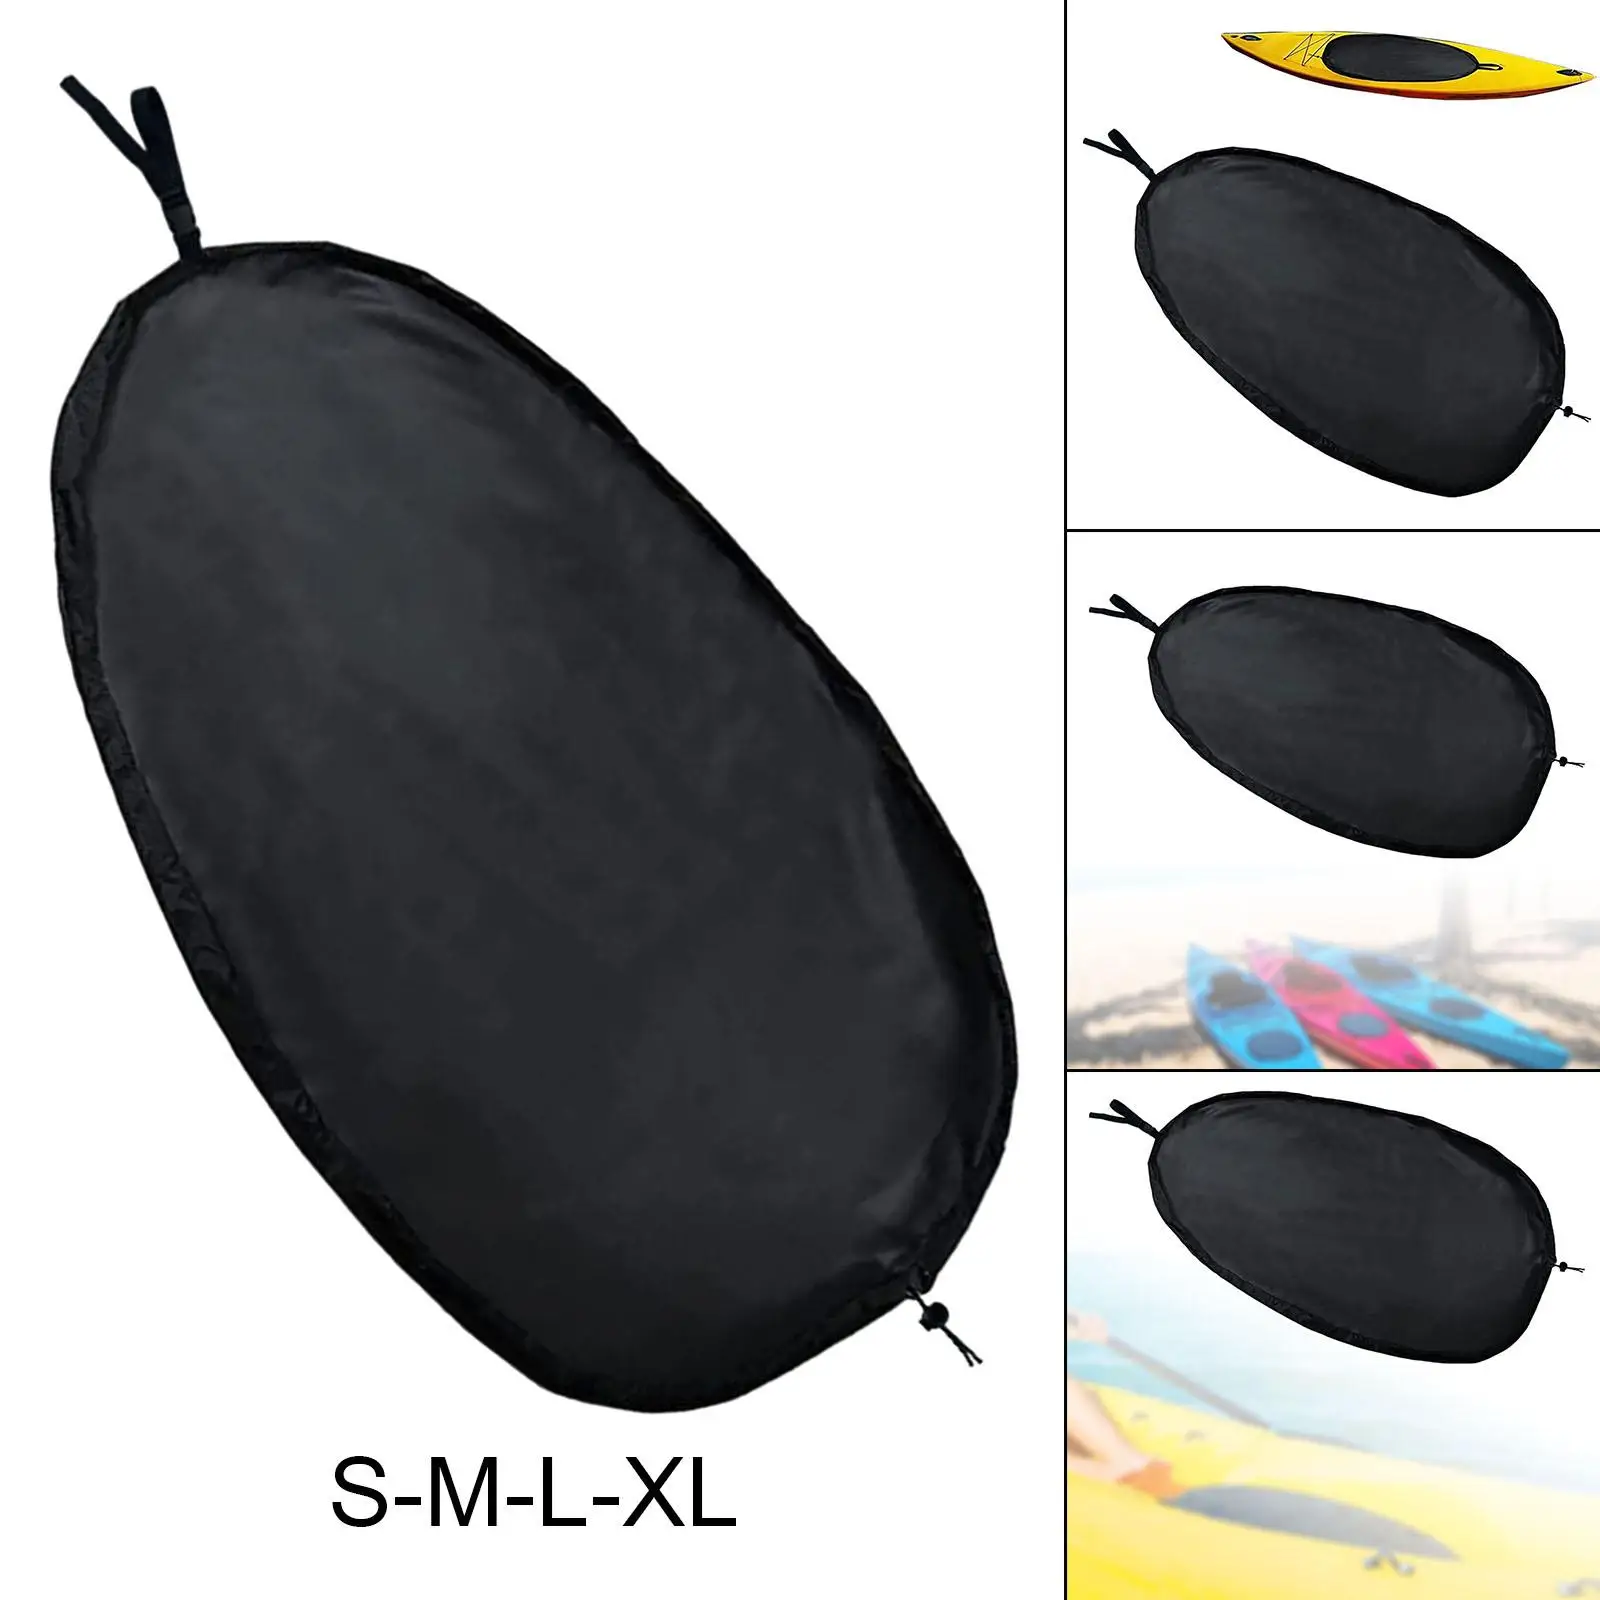 Portable Kayak Cockpit Cover Protection Dust Cover for Outdoor Canoe Boat